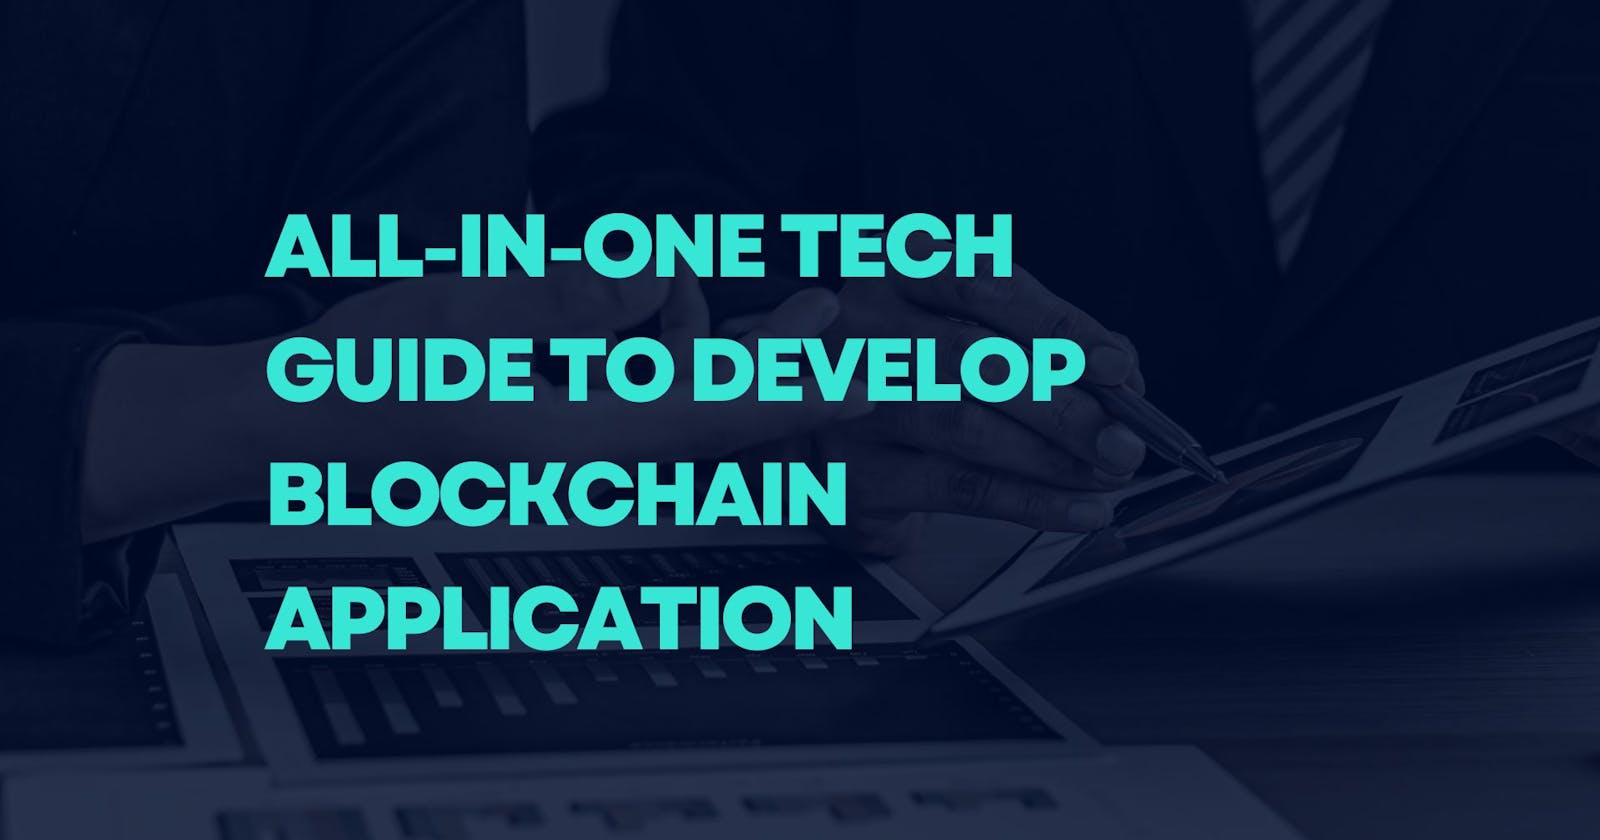 All-In-One Tech Guide To Develop Blockchain Application